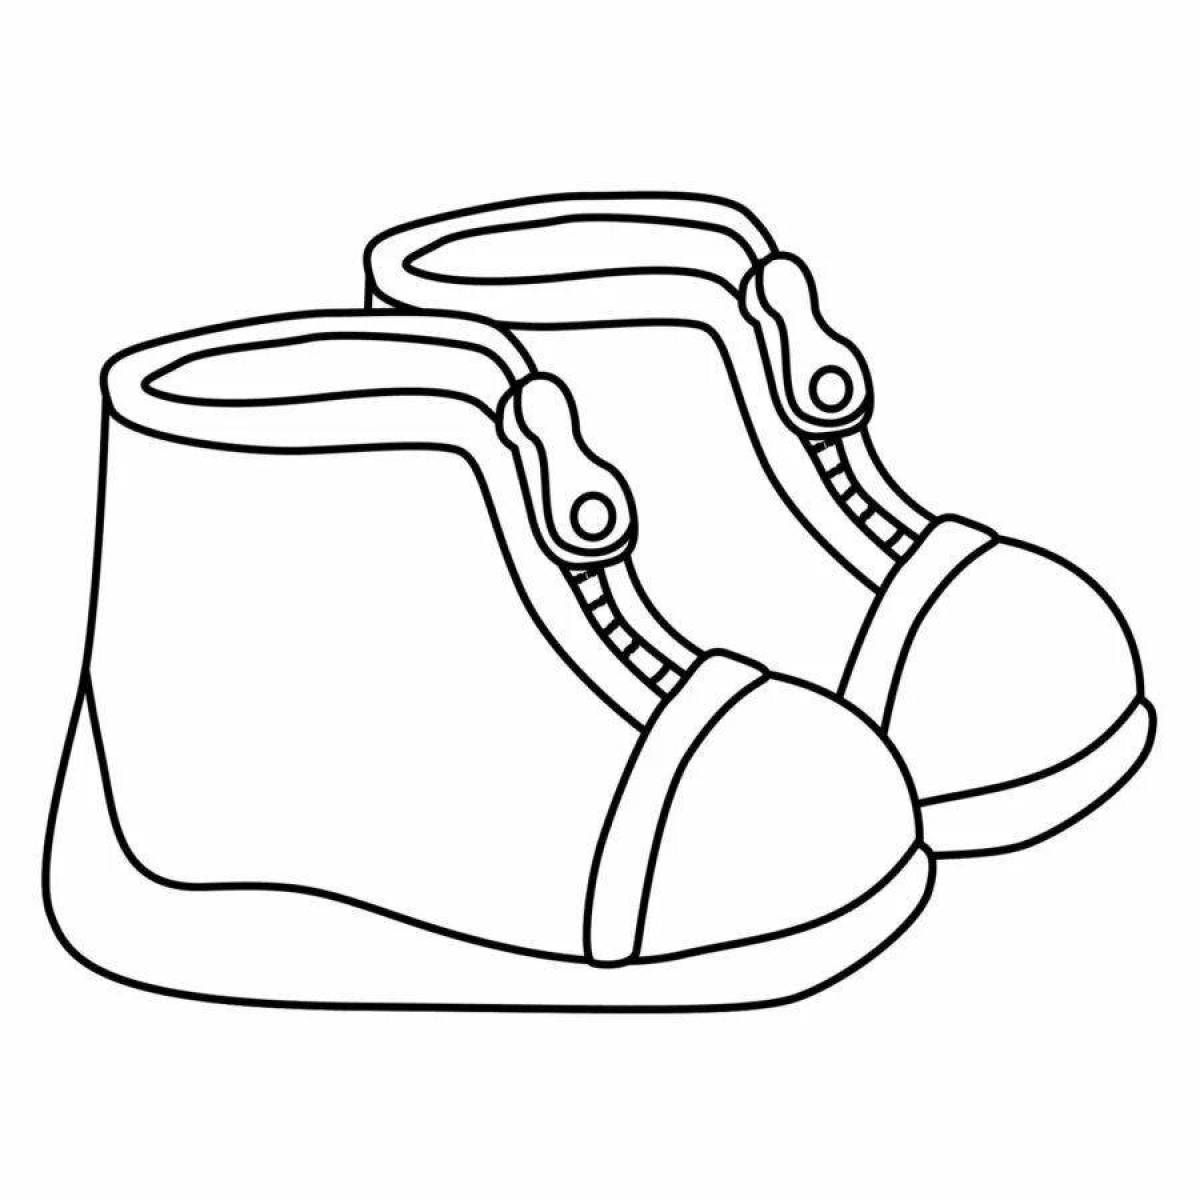 Colorful shoe coloring page for 3-4 year olds